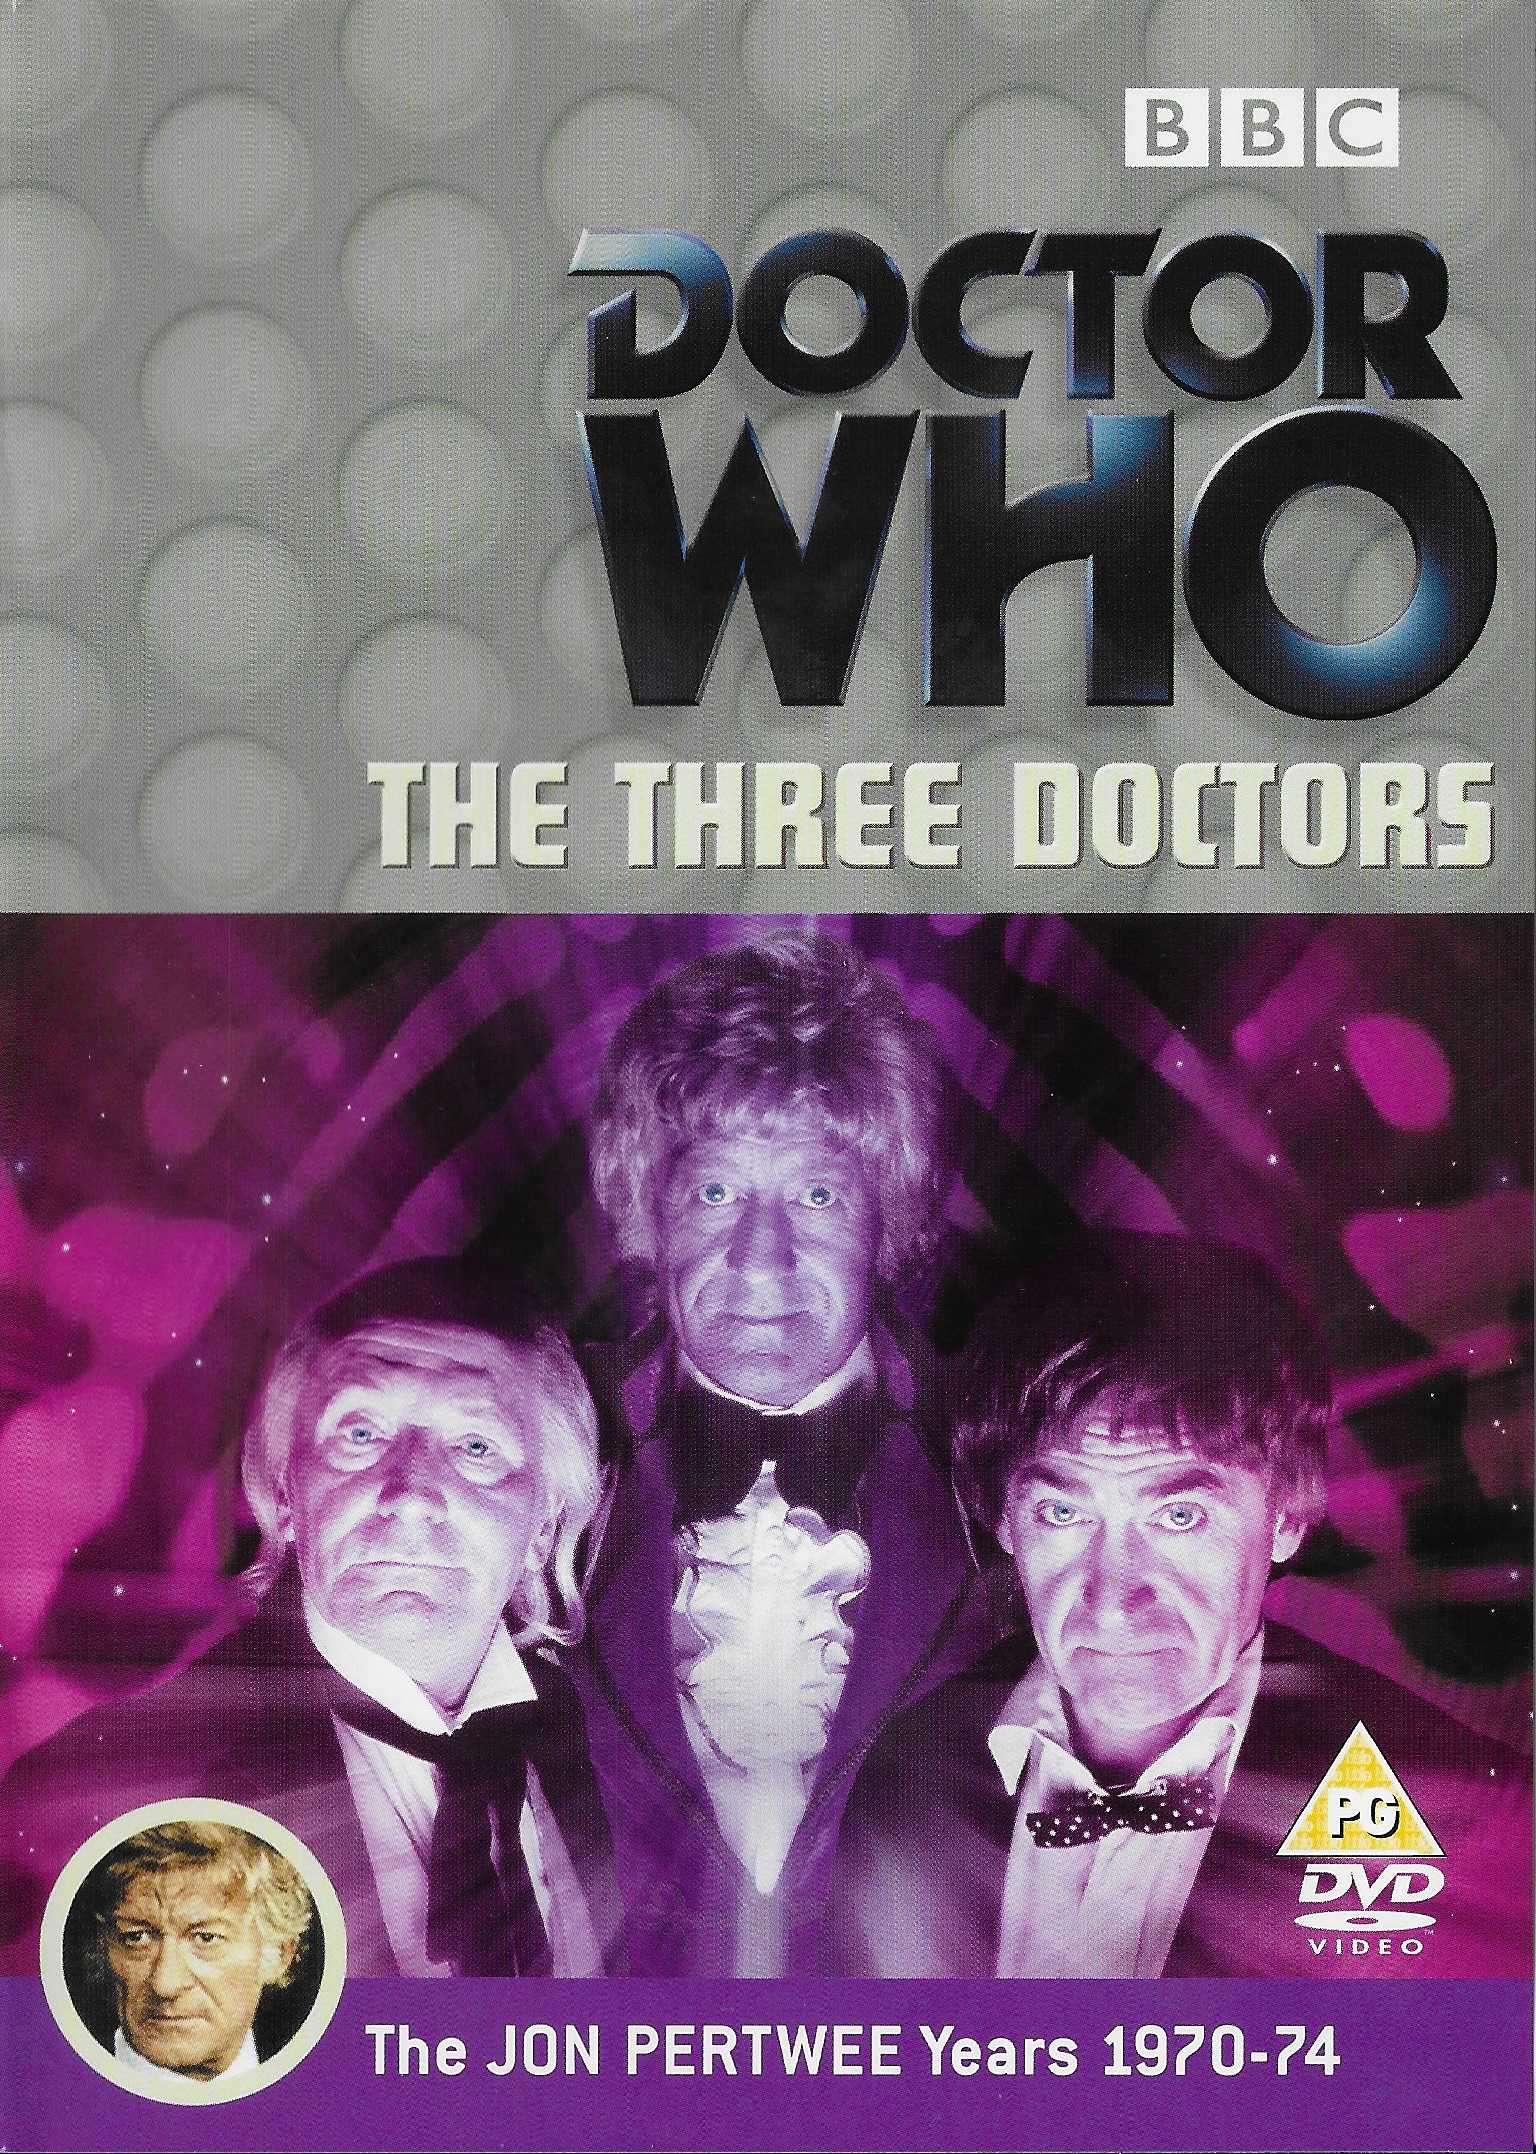 Picture of BBCDVD 1144 Doctor Who - The three doctors - Including model car by artist Bob Baker / Dave Martin from the BBC dvds - Records and Tapes library